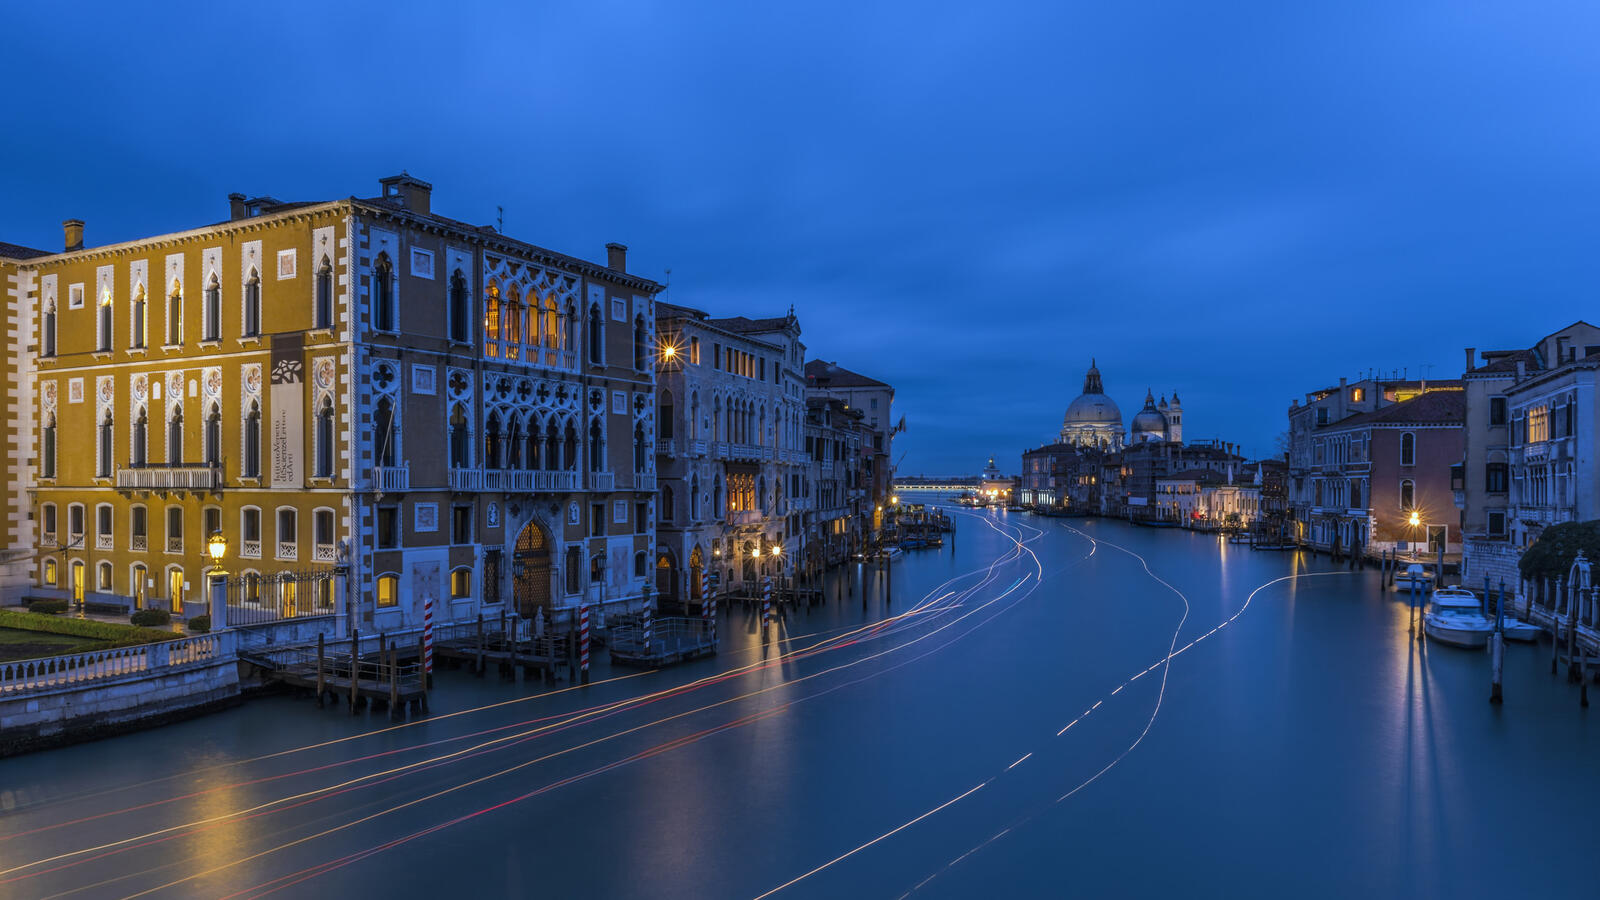 Wallpapers Canal Grande Venice Italy on the desktop